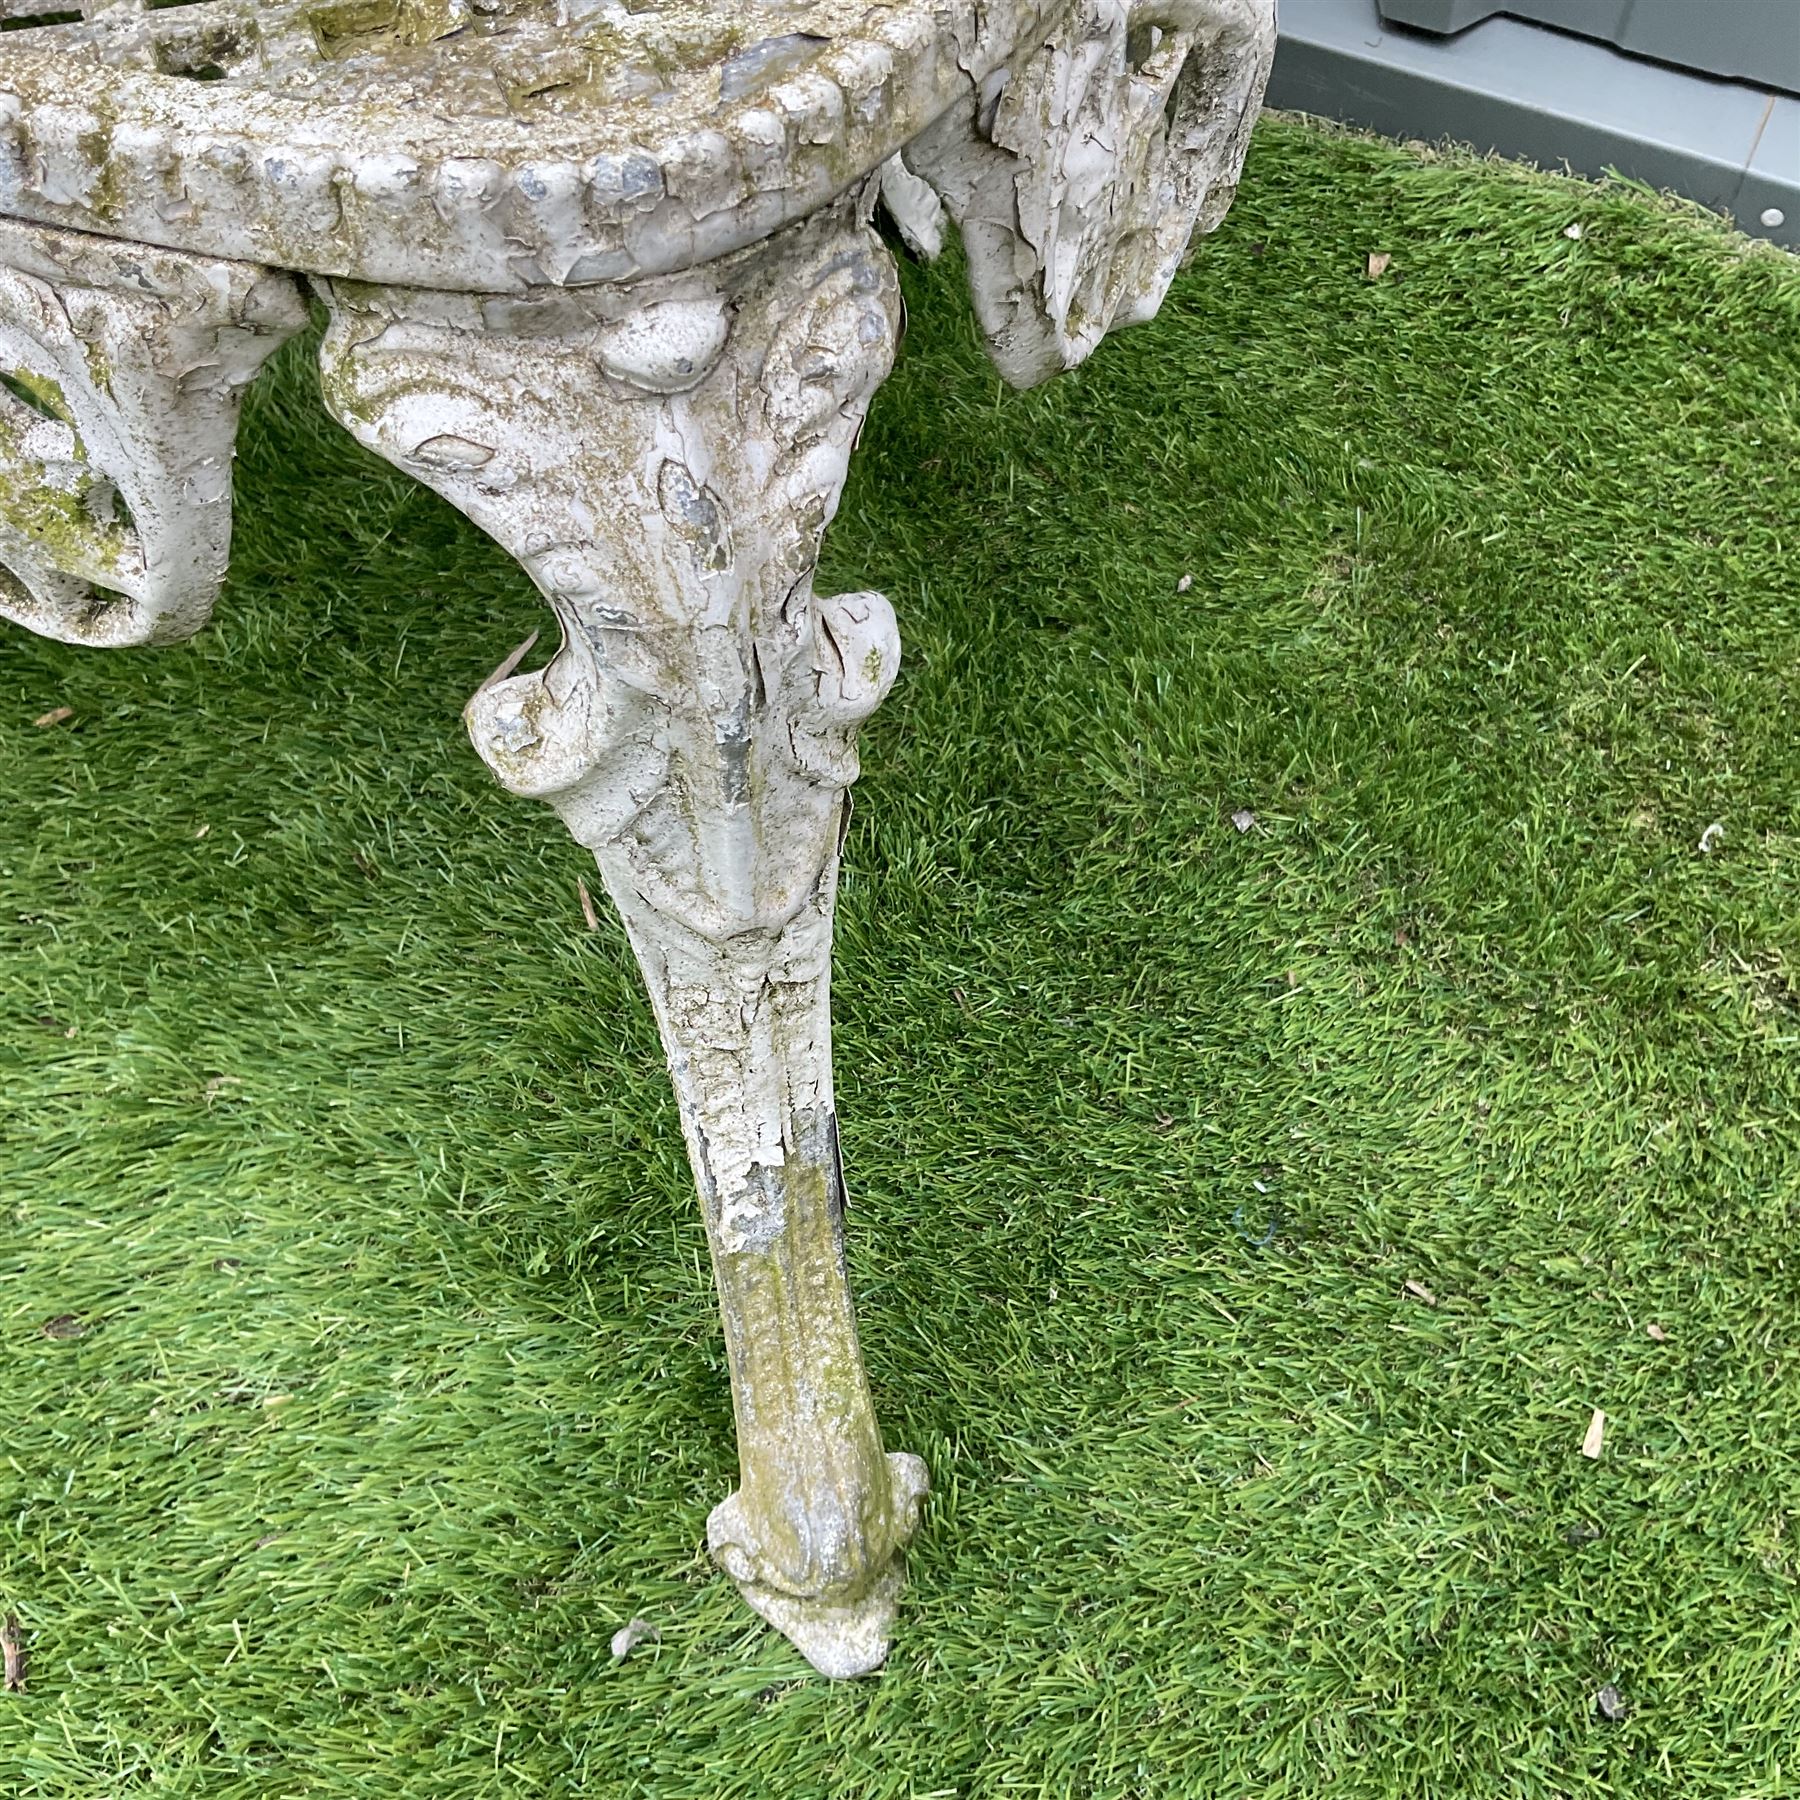 Cast aluminium thee seat garden bench painted in white - Image 4 of 5